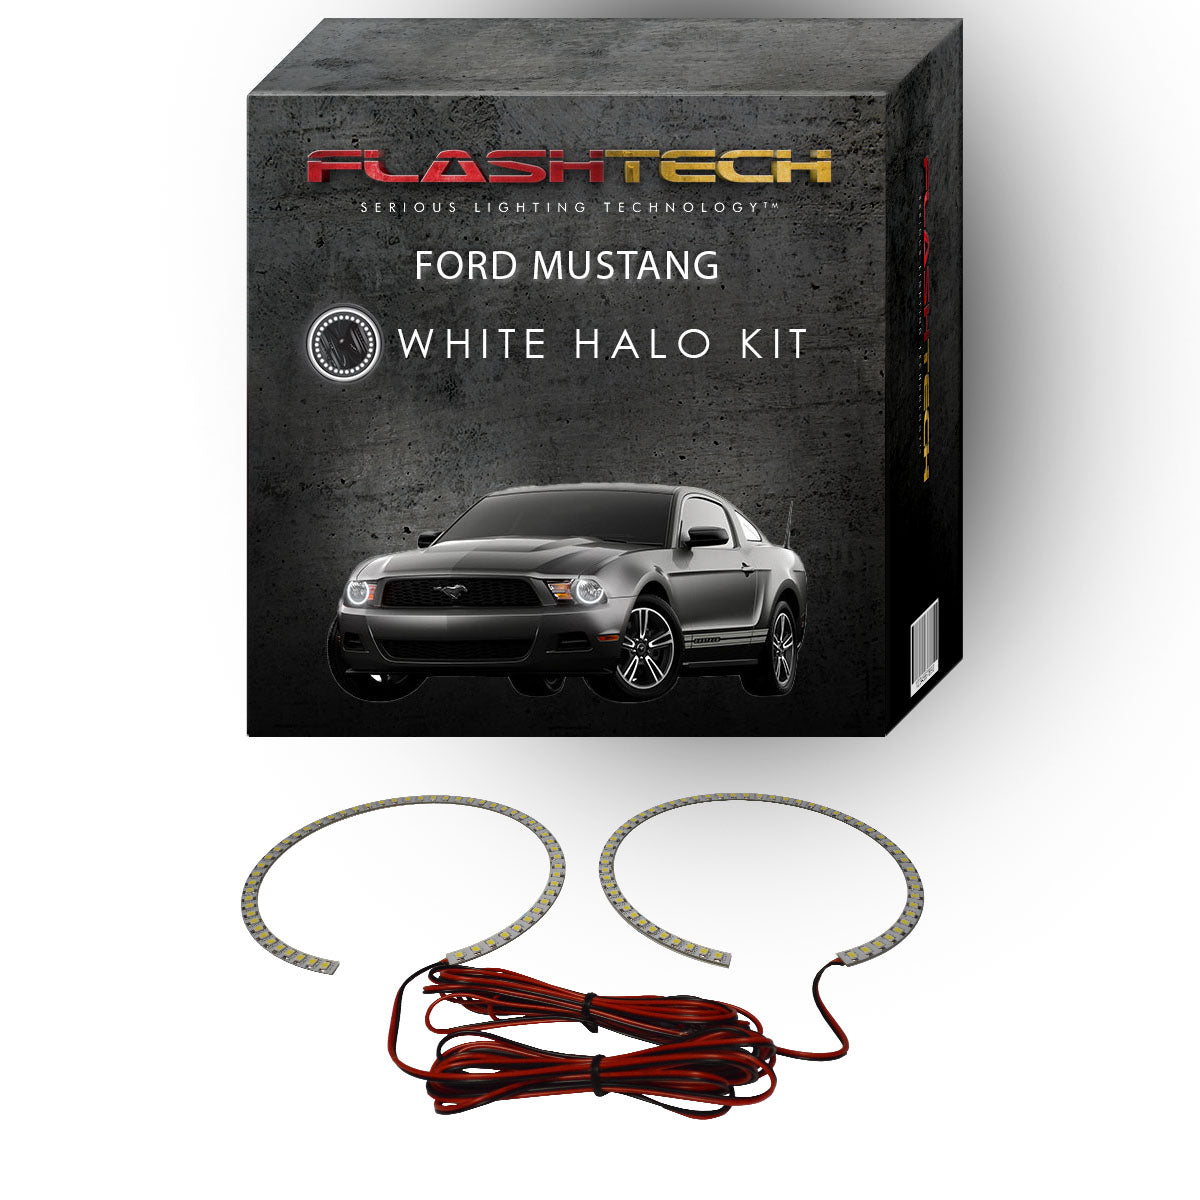 Ford-Mustang-2010, 2011, 2012, 2013-LED-Halo-Headlights-White-RF Remote White-FO-MU1014-WHRF